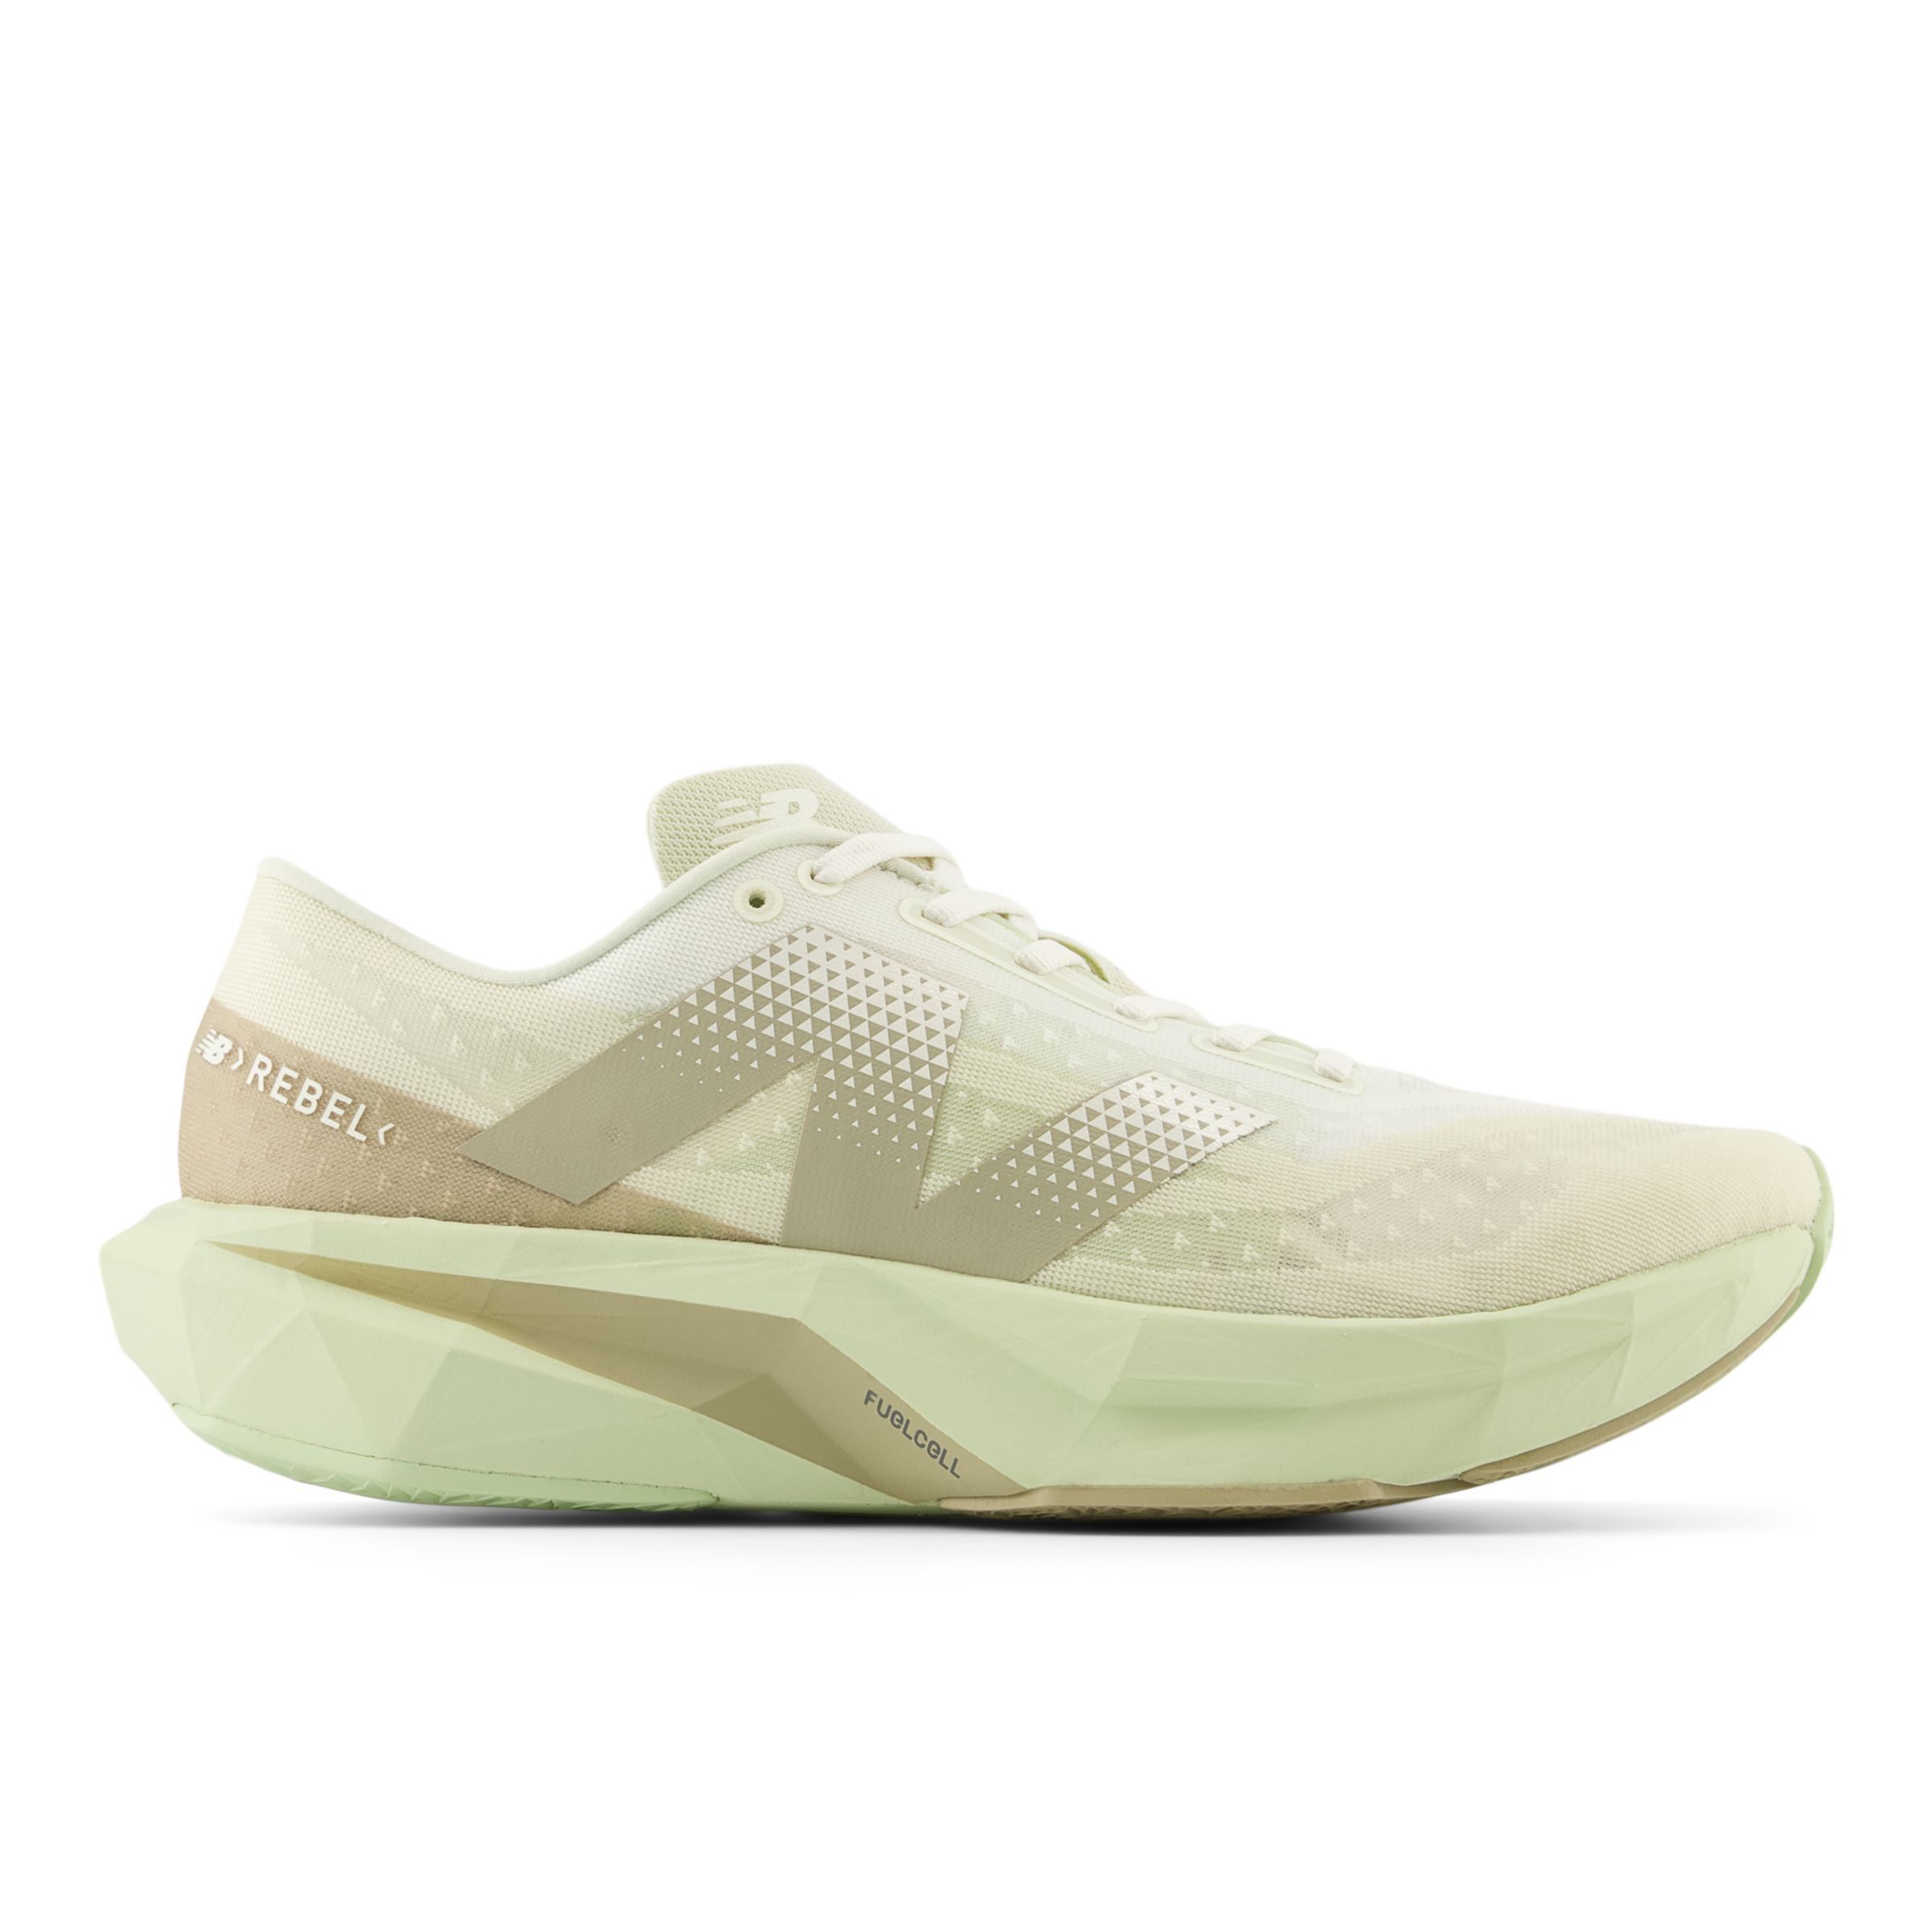 New Balance Homme FuelCell Rebel v4 en Marron/Vert/Beige, Synthetic, Taille 44 Large